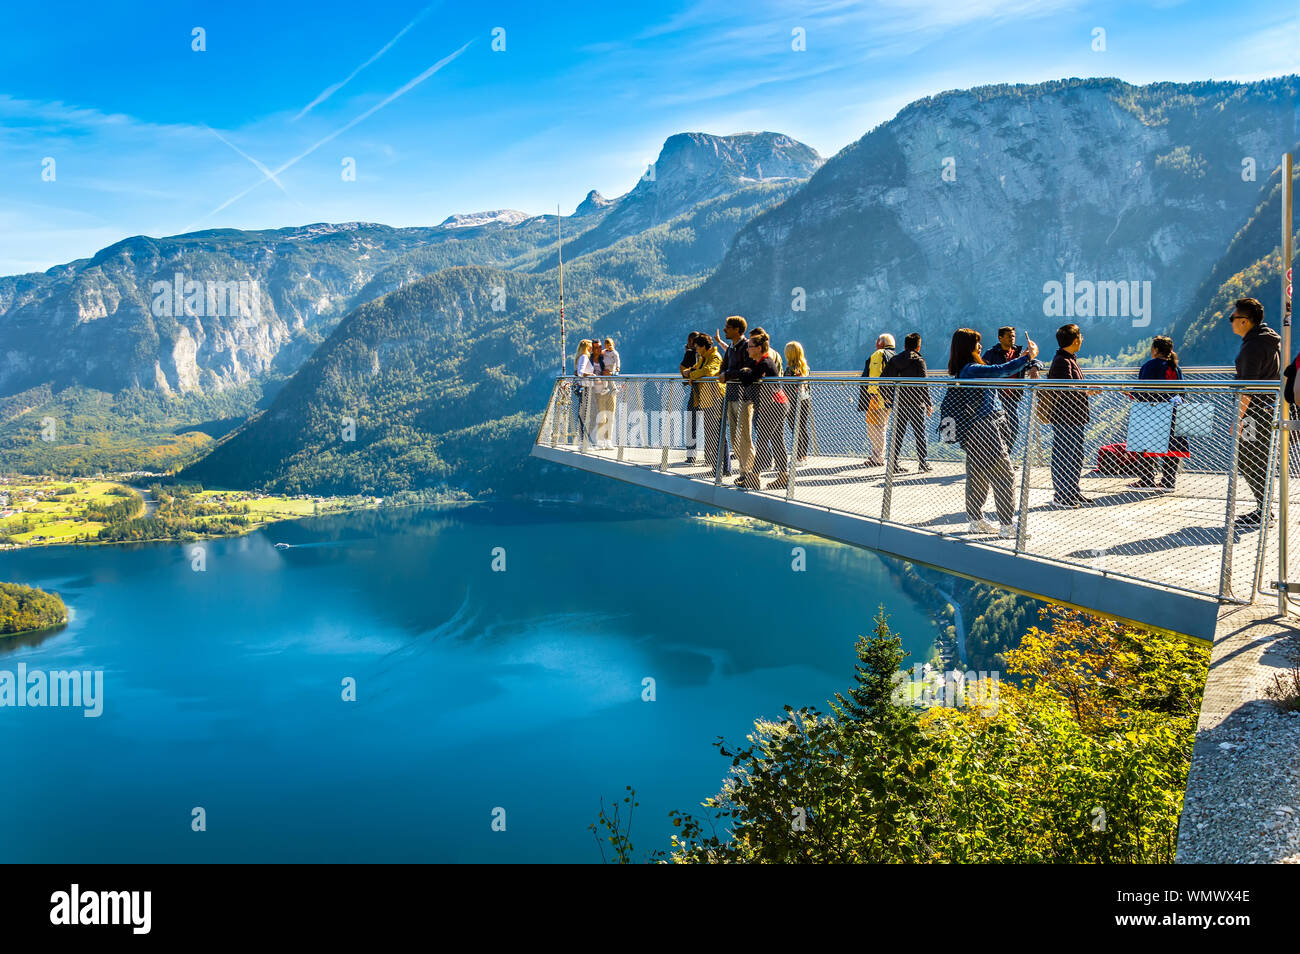 Hallstatt, Austria - OCT 2018: Tourists take photos and enjoy the view of the mountains and lake Hallstatter See from the World Heritage View Point. Stock Photo